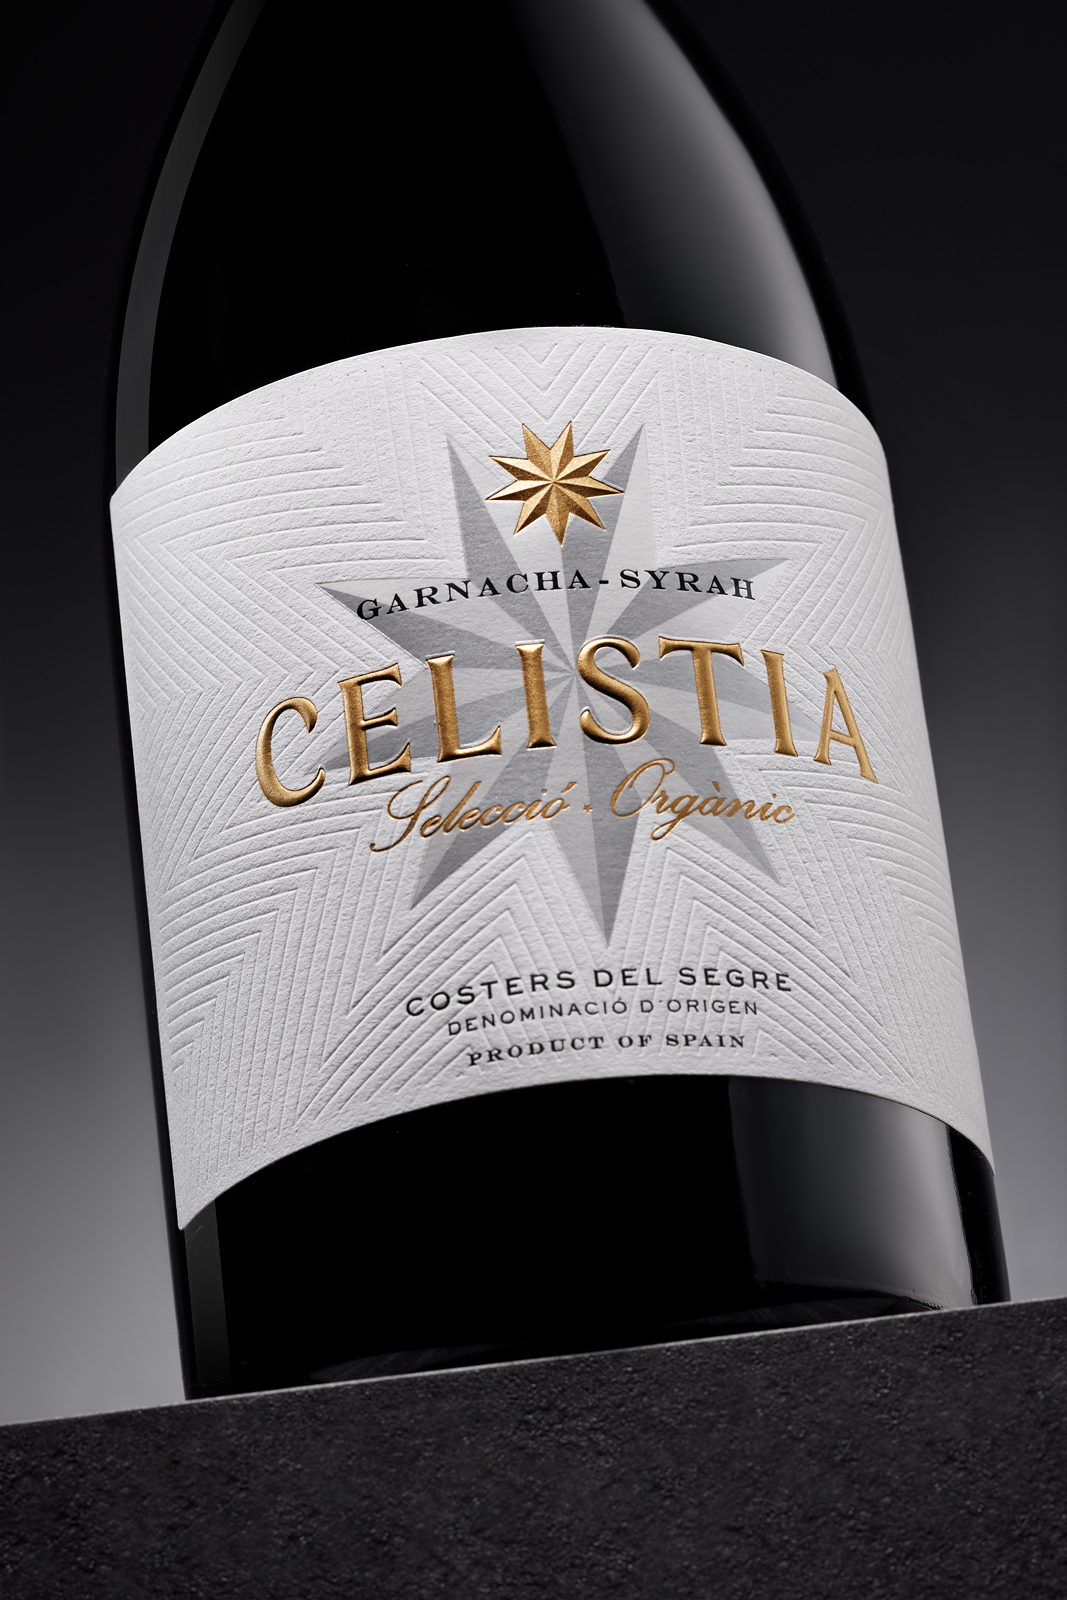 Aged Red wine Celistia label | Costers del Sió Winery | D.O. Costers del Segre